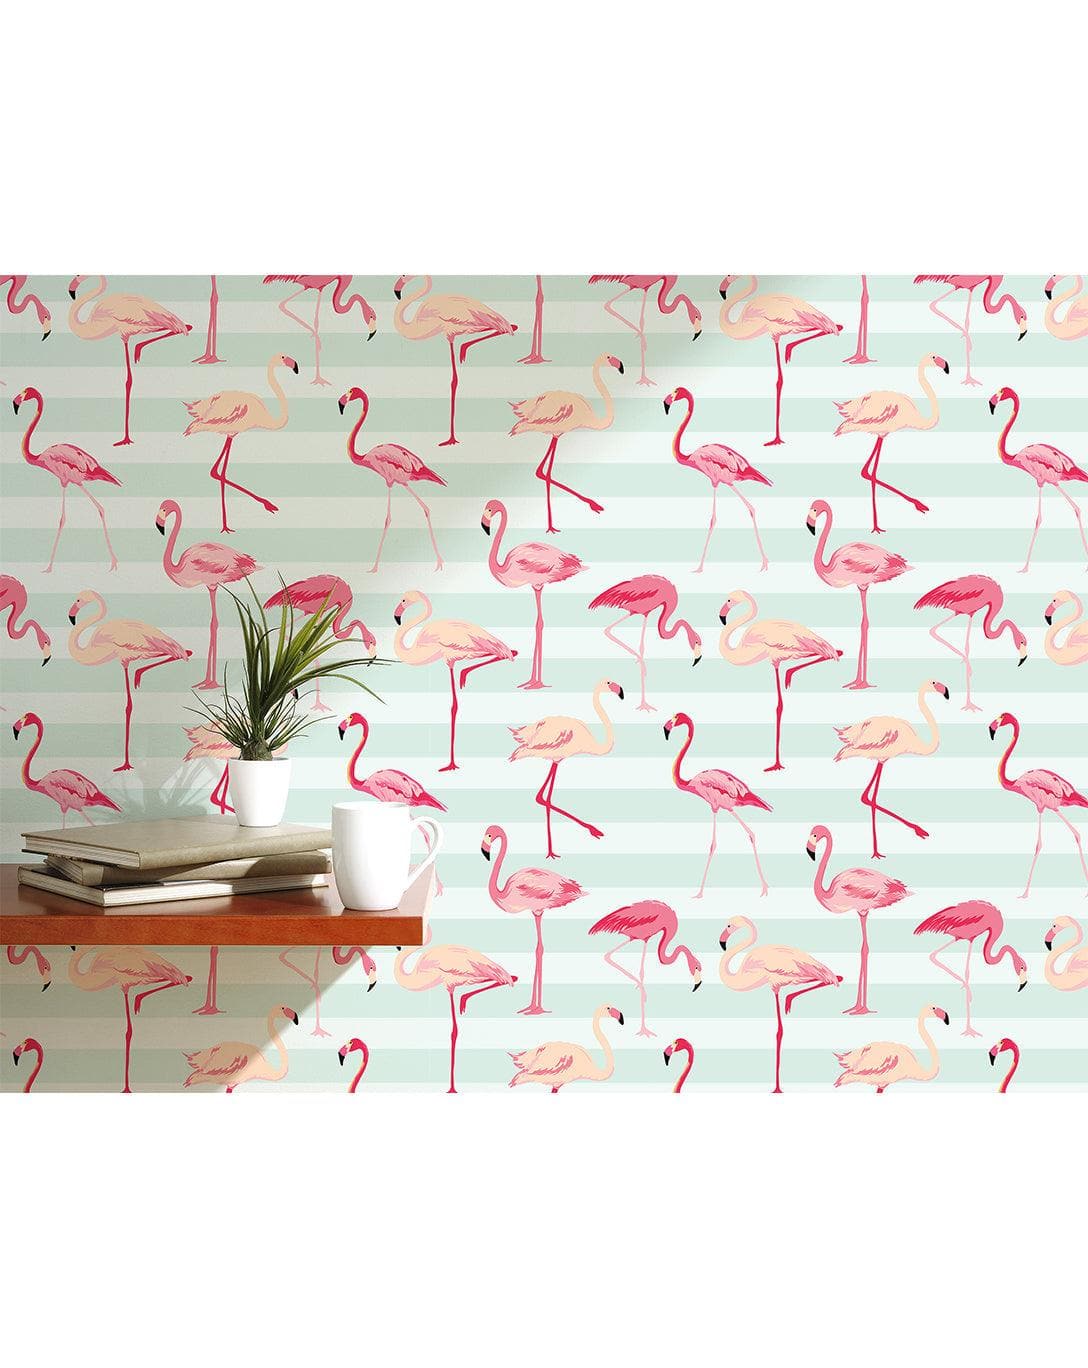 Colorful Tropical Pink Flamingos Removable Wallpaper - MAIA HOMES